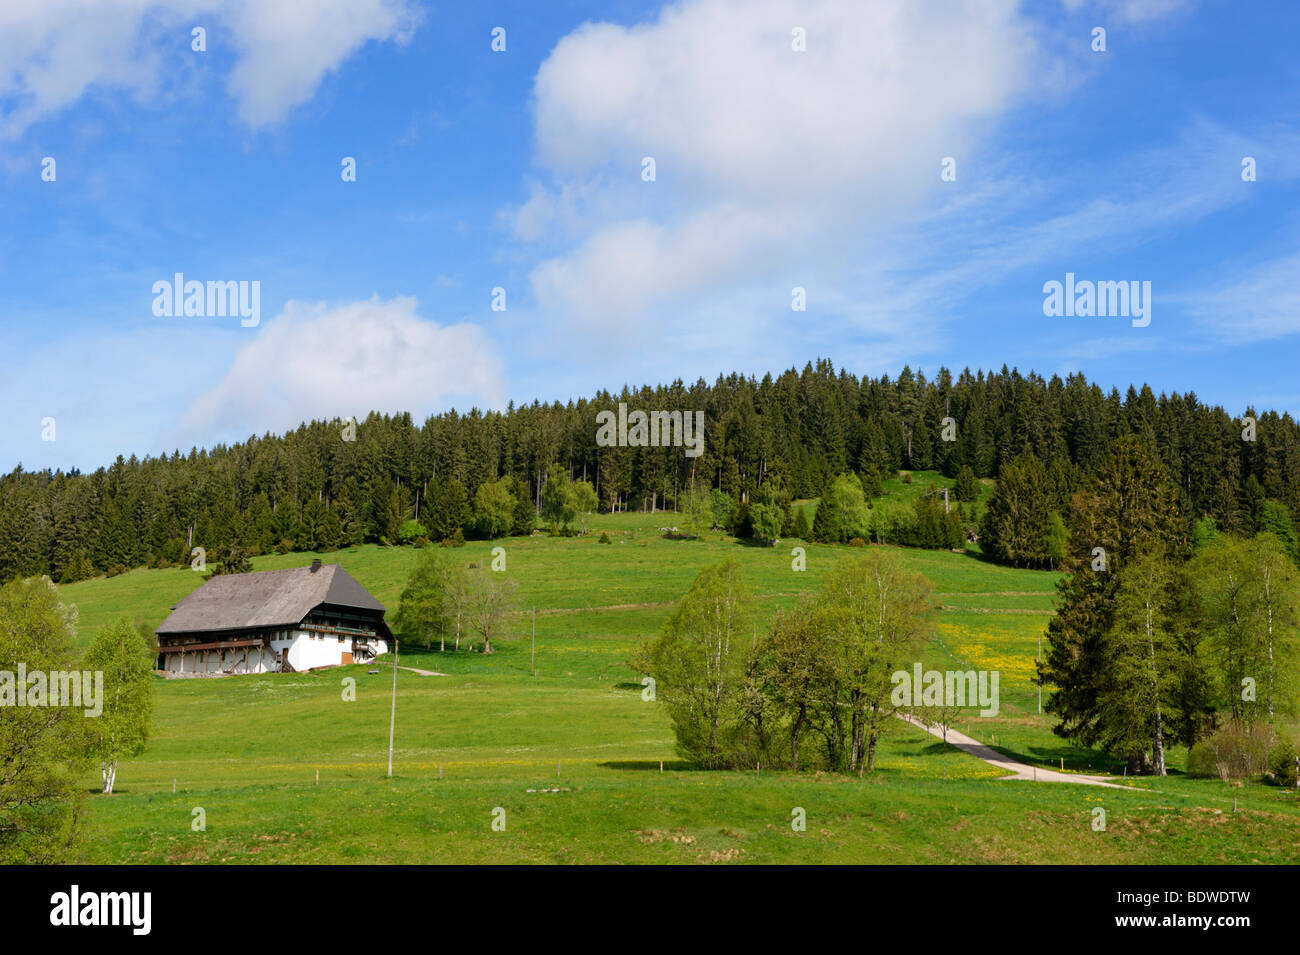 Farmhouse in the Hochschwarzwald Upper Black Forest near the Schluchsee lake, Black forest, Baden-Wuerttemberg, Germany, Europe Stock Photo